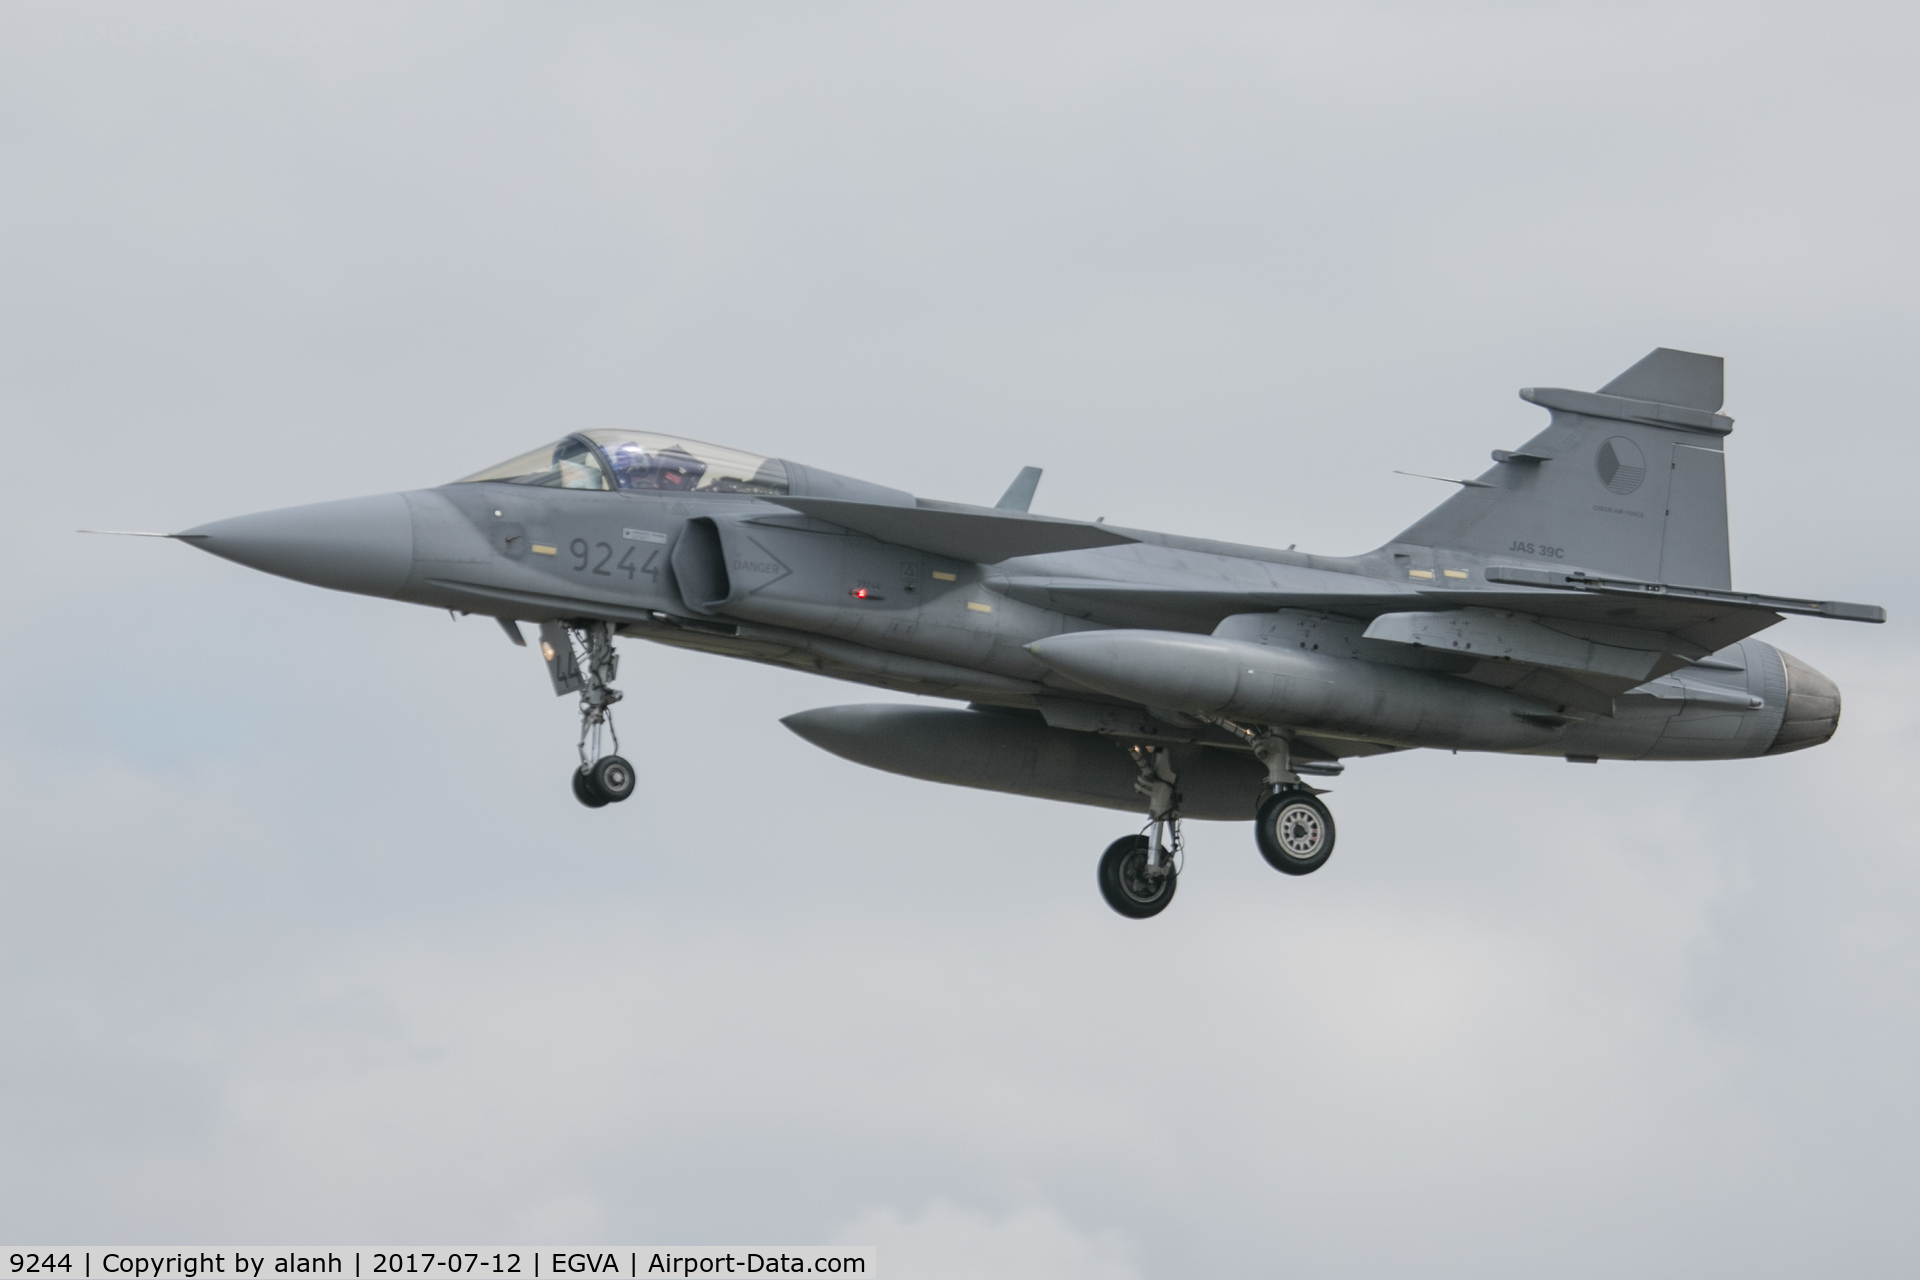 9244, Saab JAS-39C Gripen C/N 39244, Arriving at Fairford for RIAT 2017